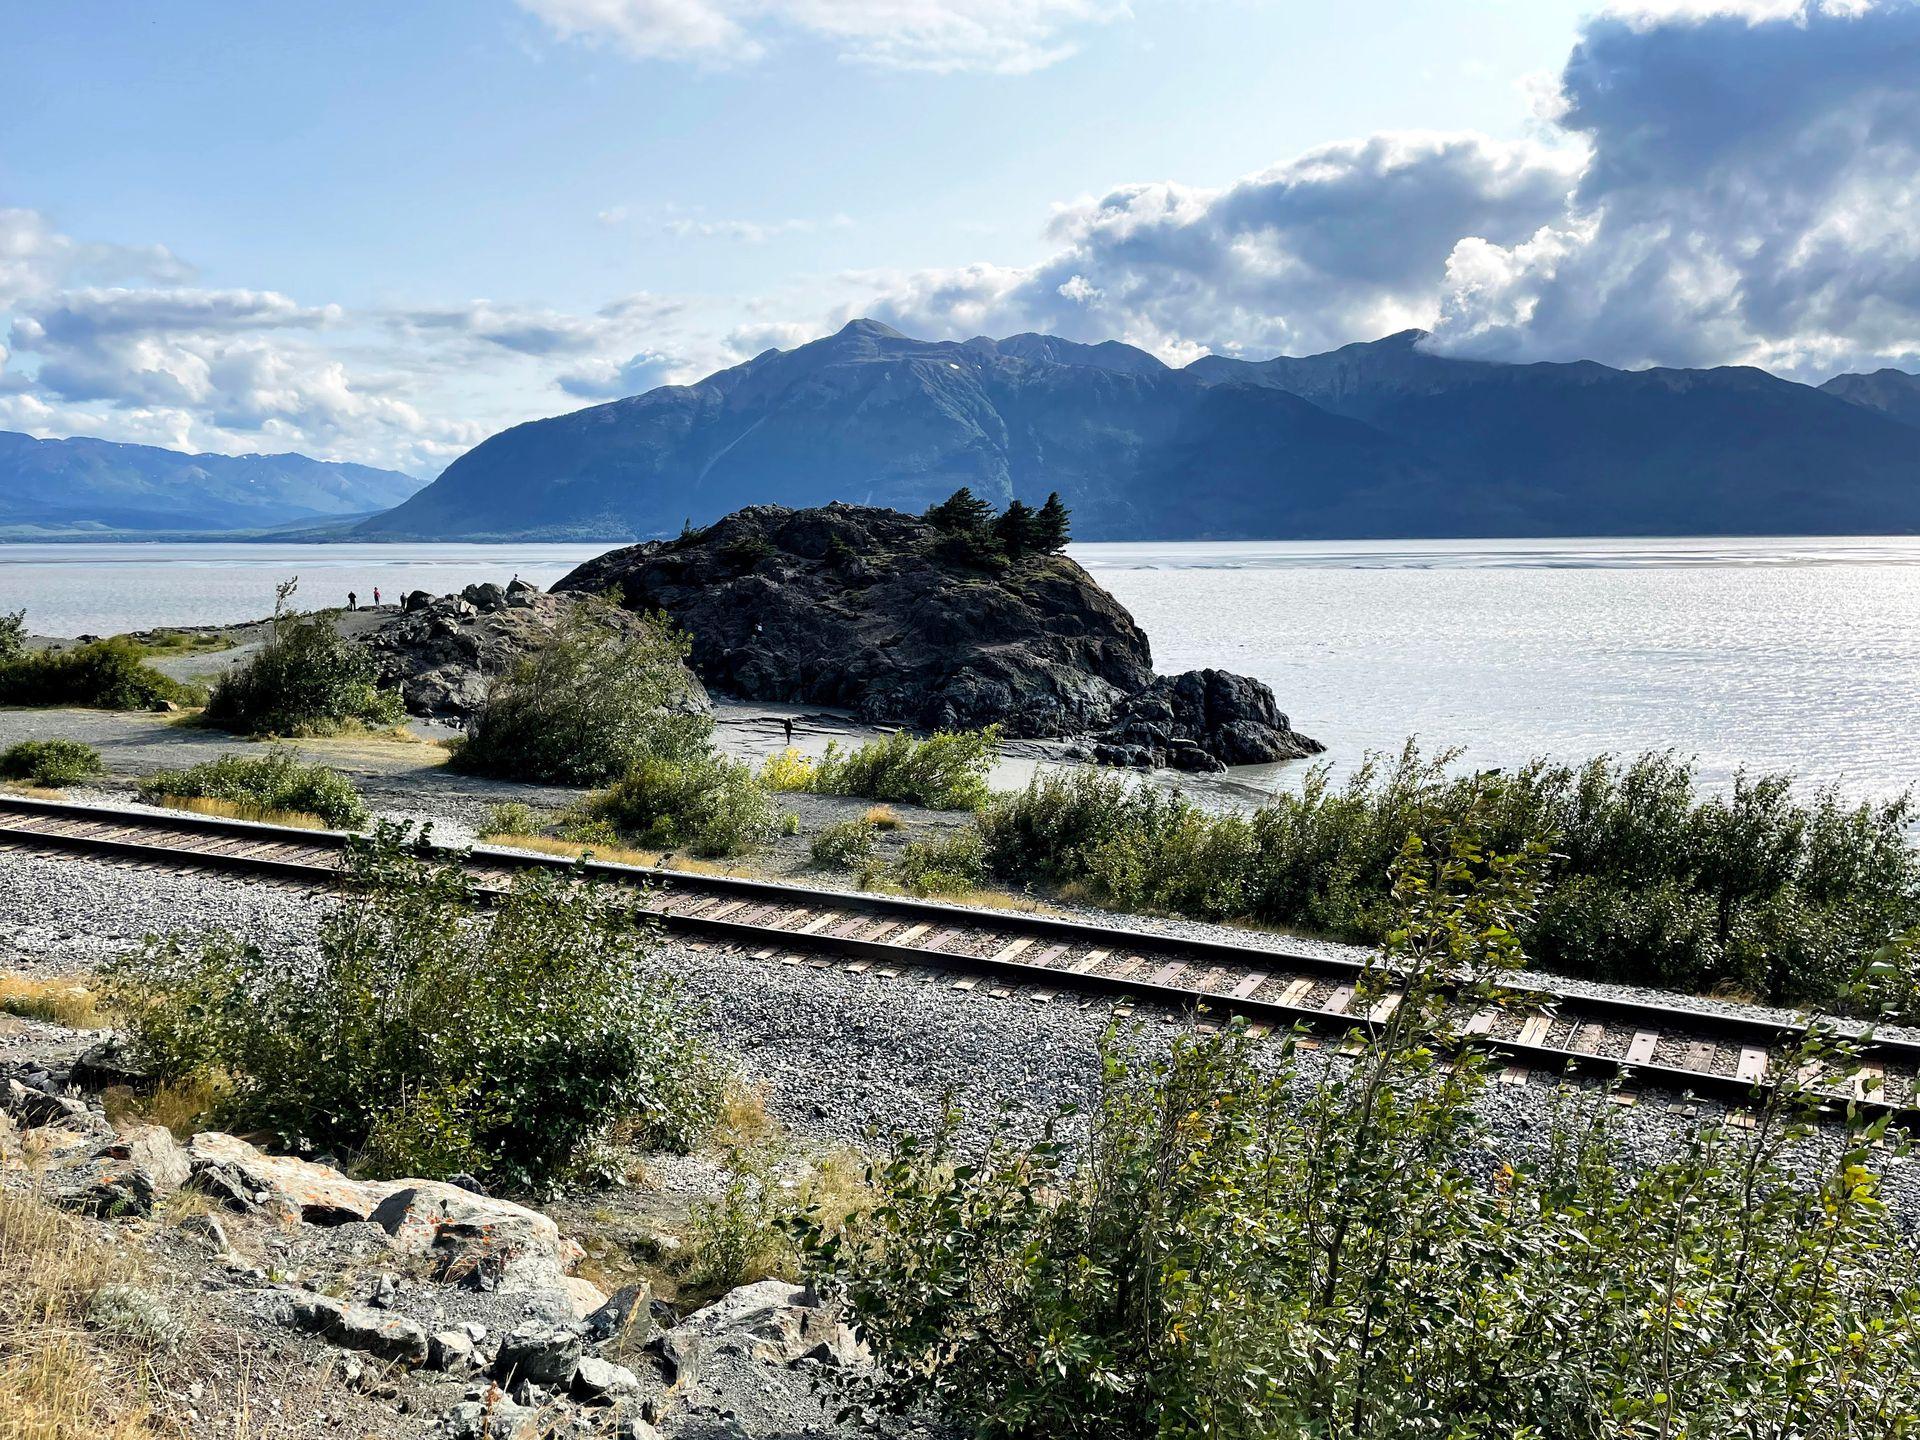 Train tracks and a giant rock on the water along the Seward Highway.